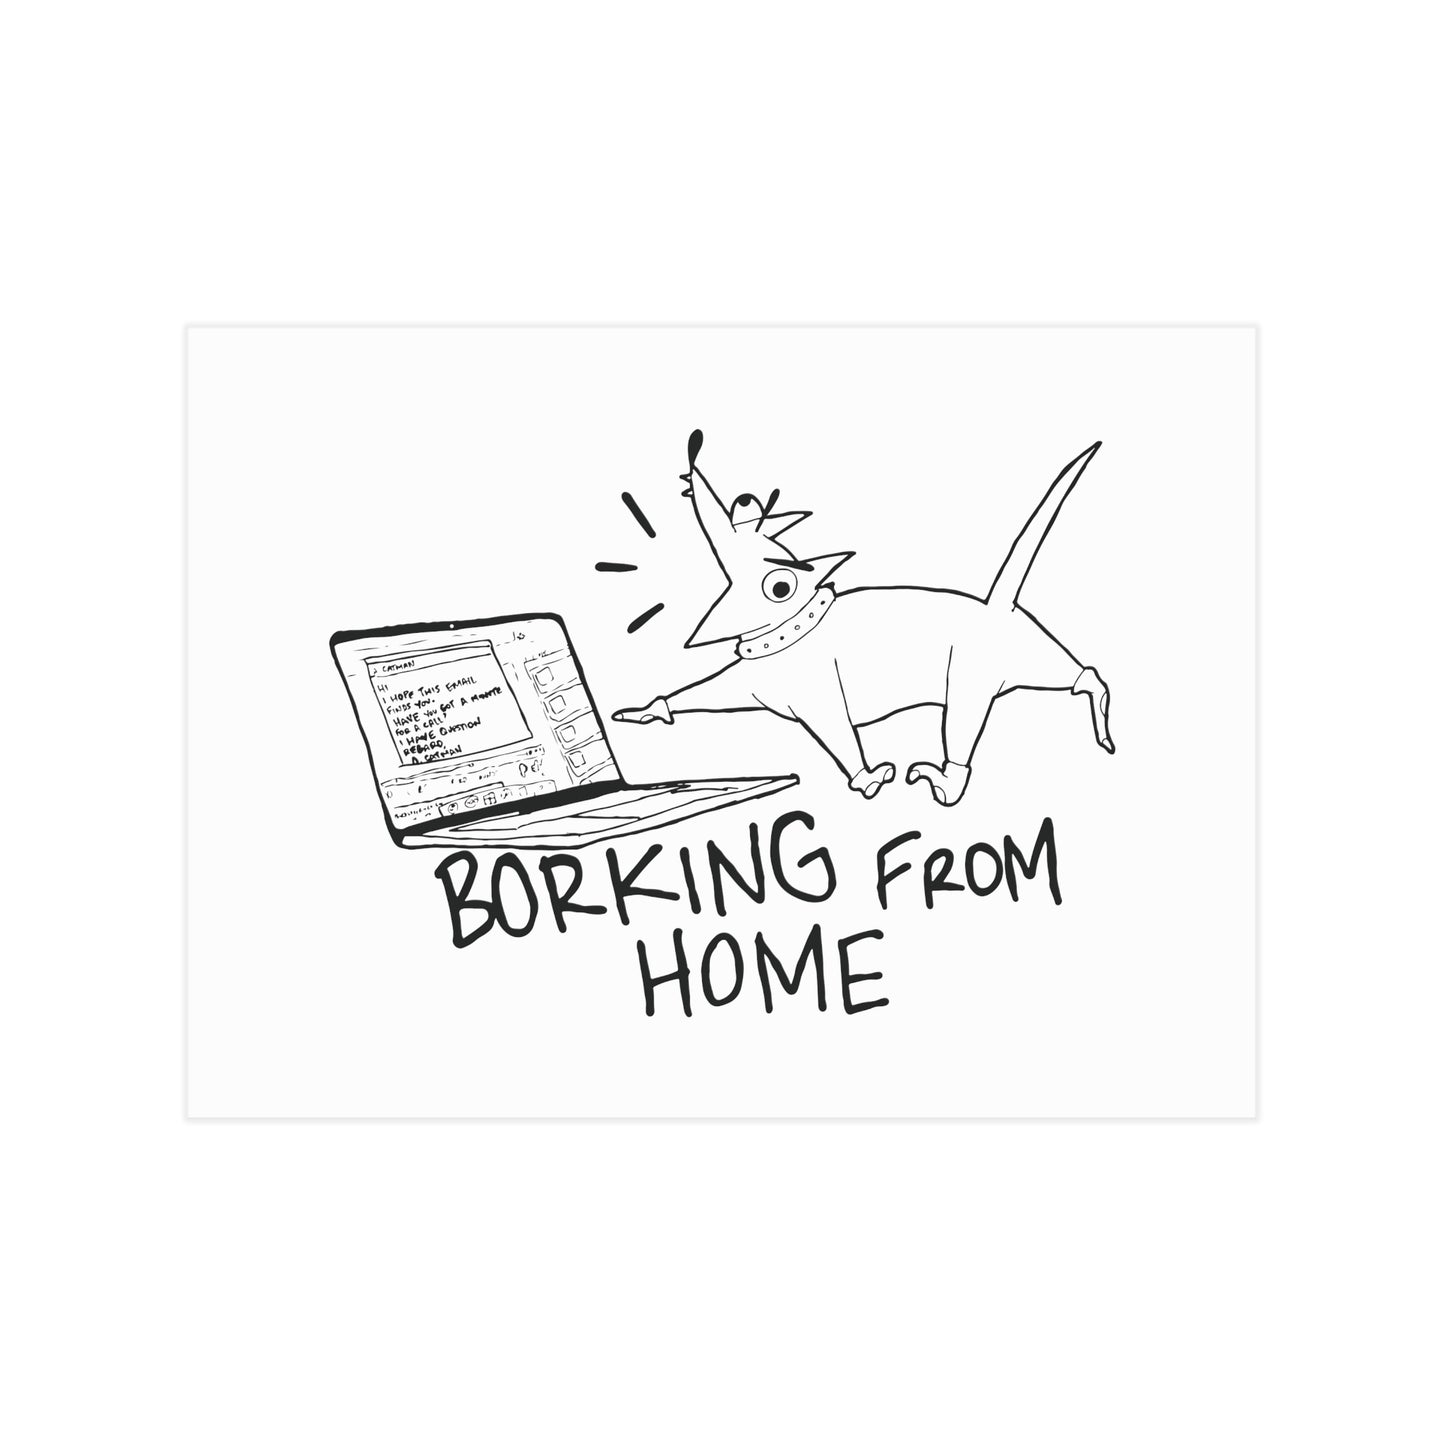 Borking From Home - Print